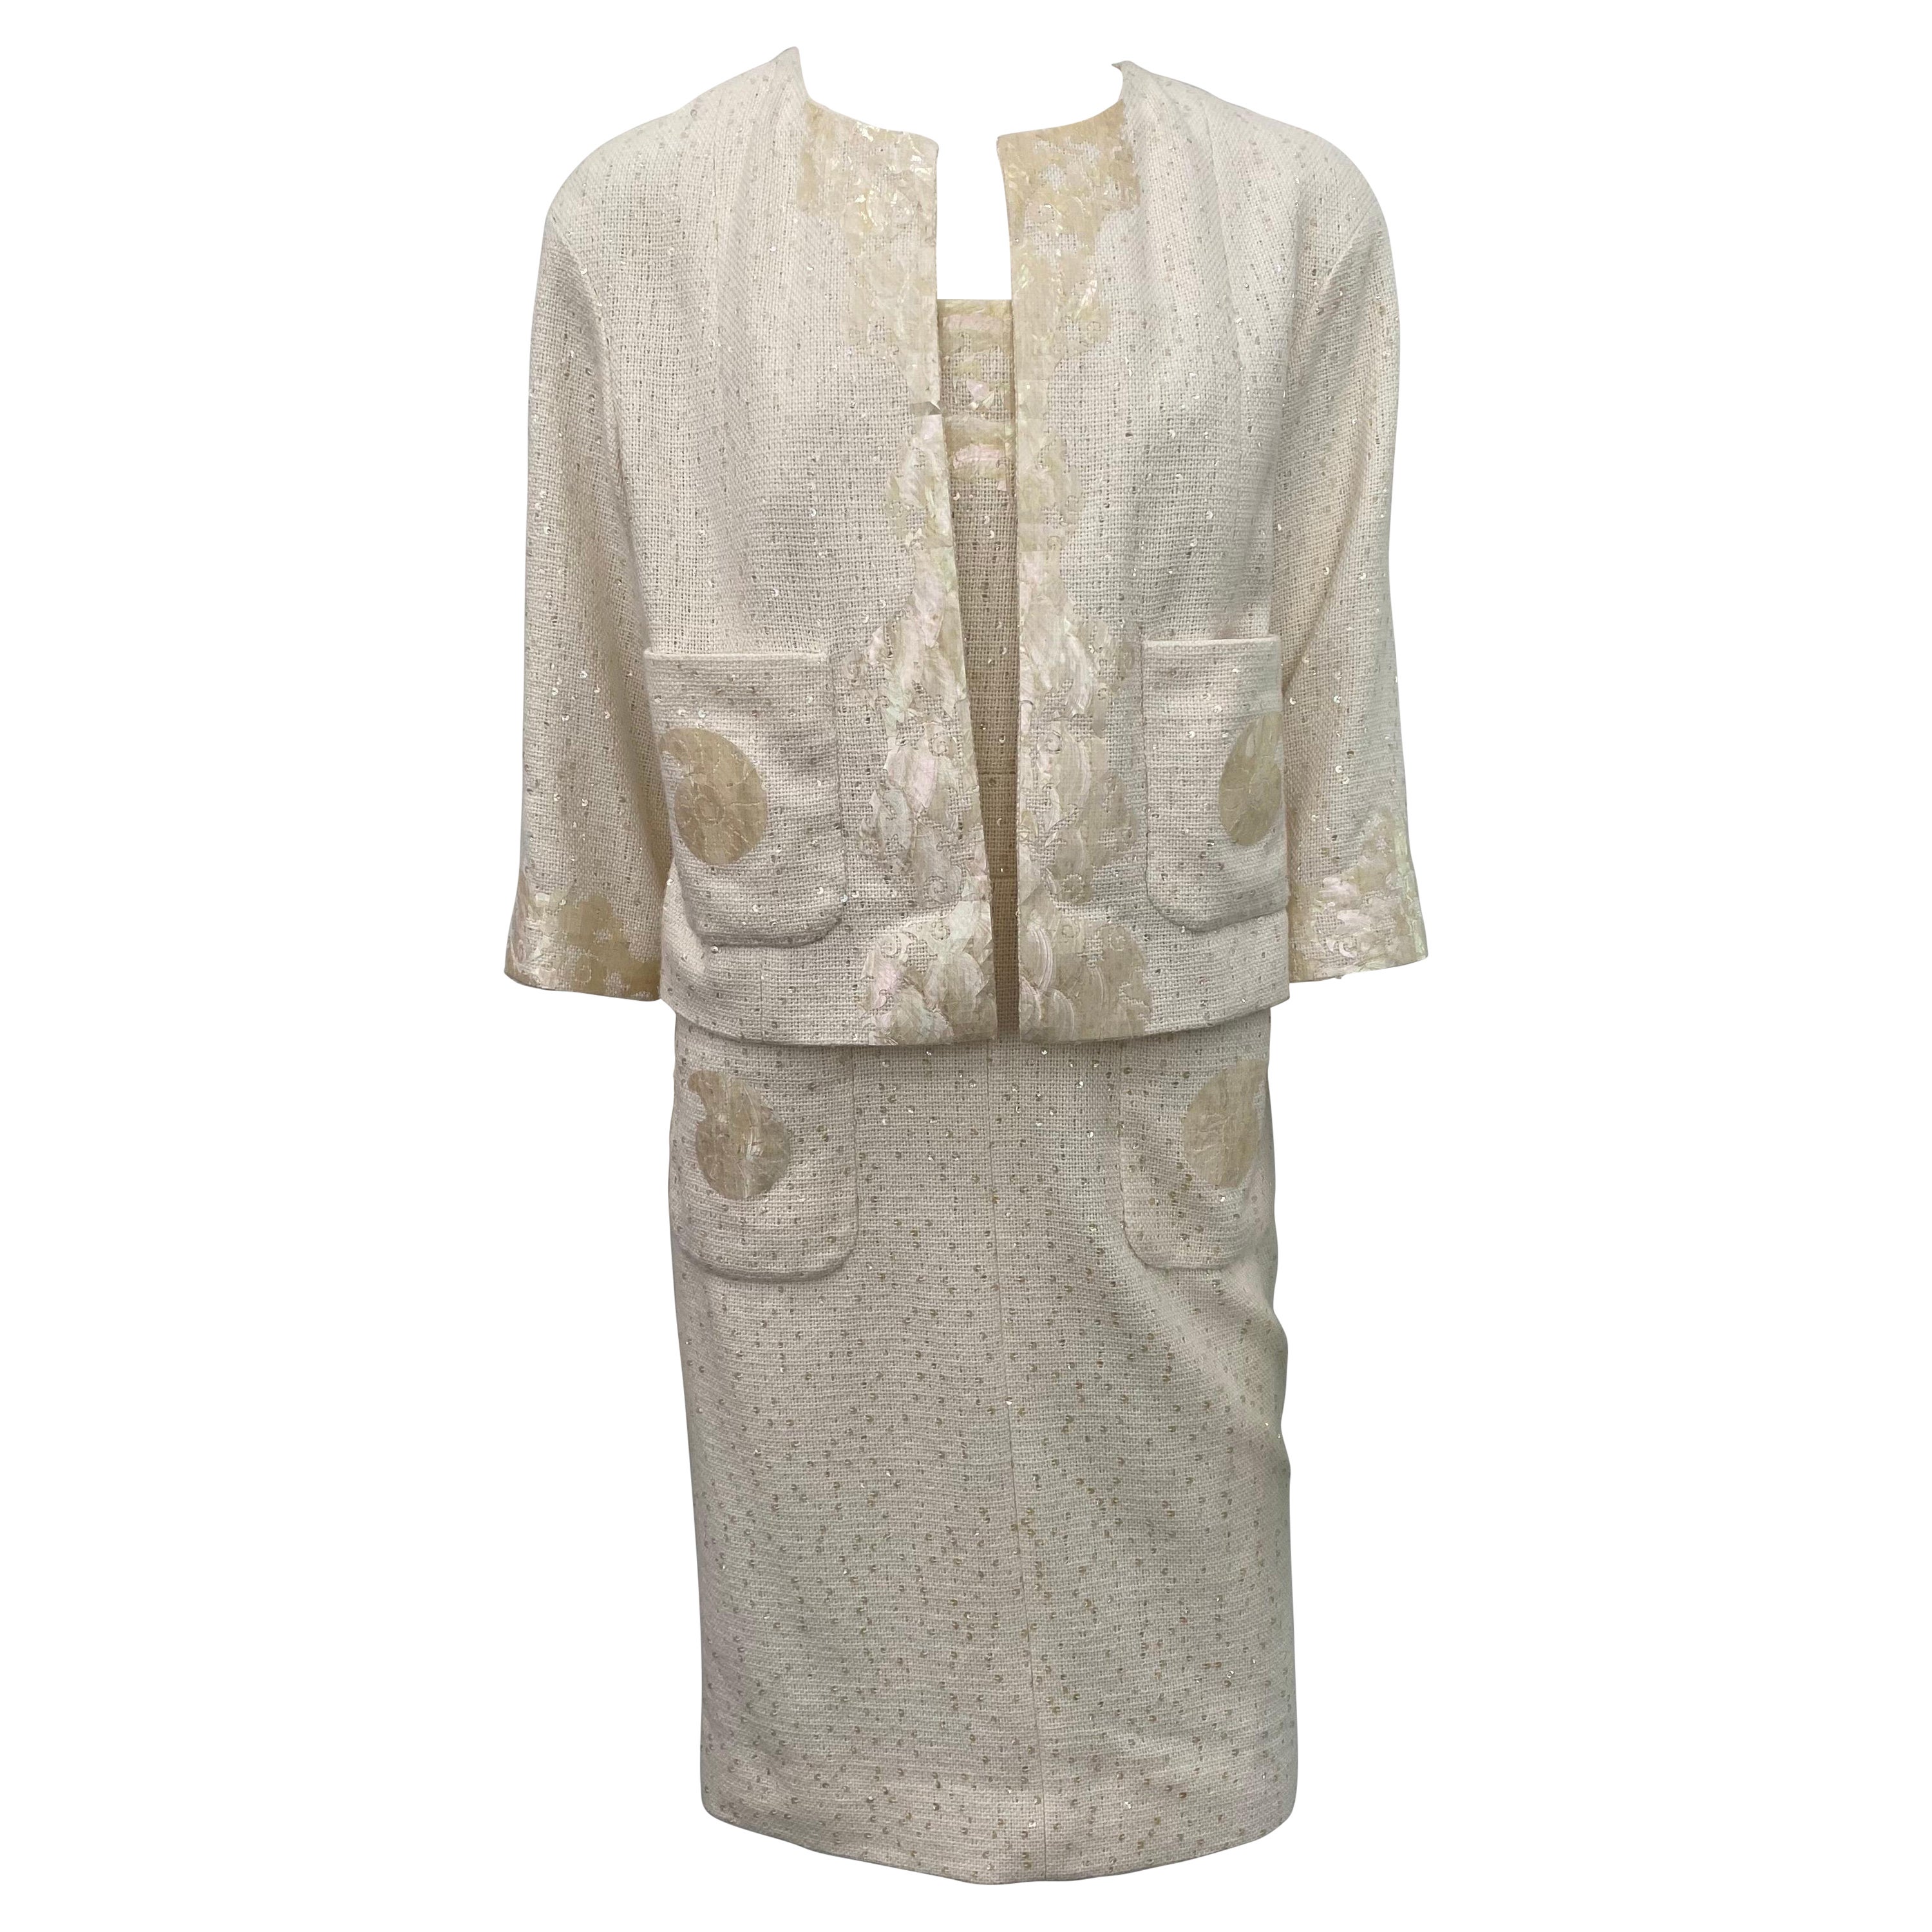 Chanel Runway 2012P Cream Cotton Embellished Strapless Dress with Jacket-Sz 40 